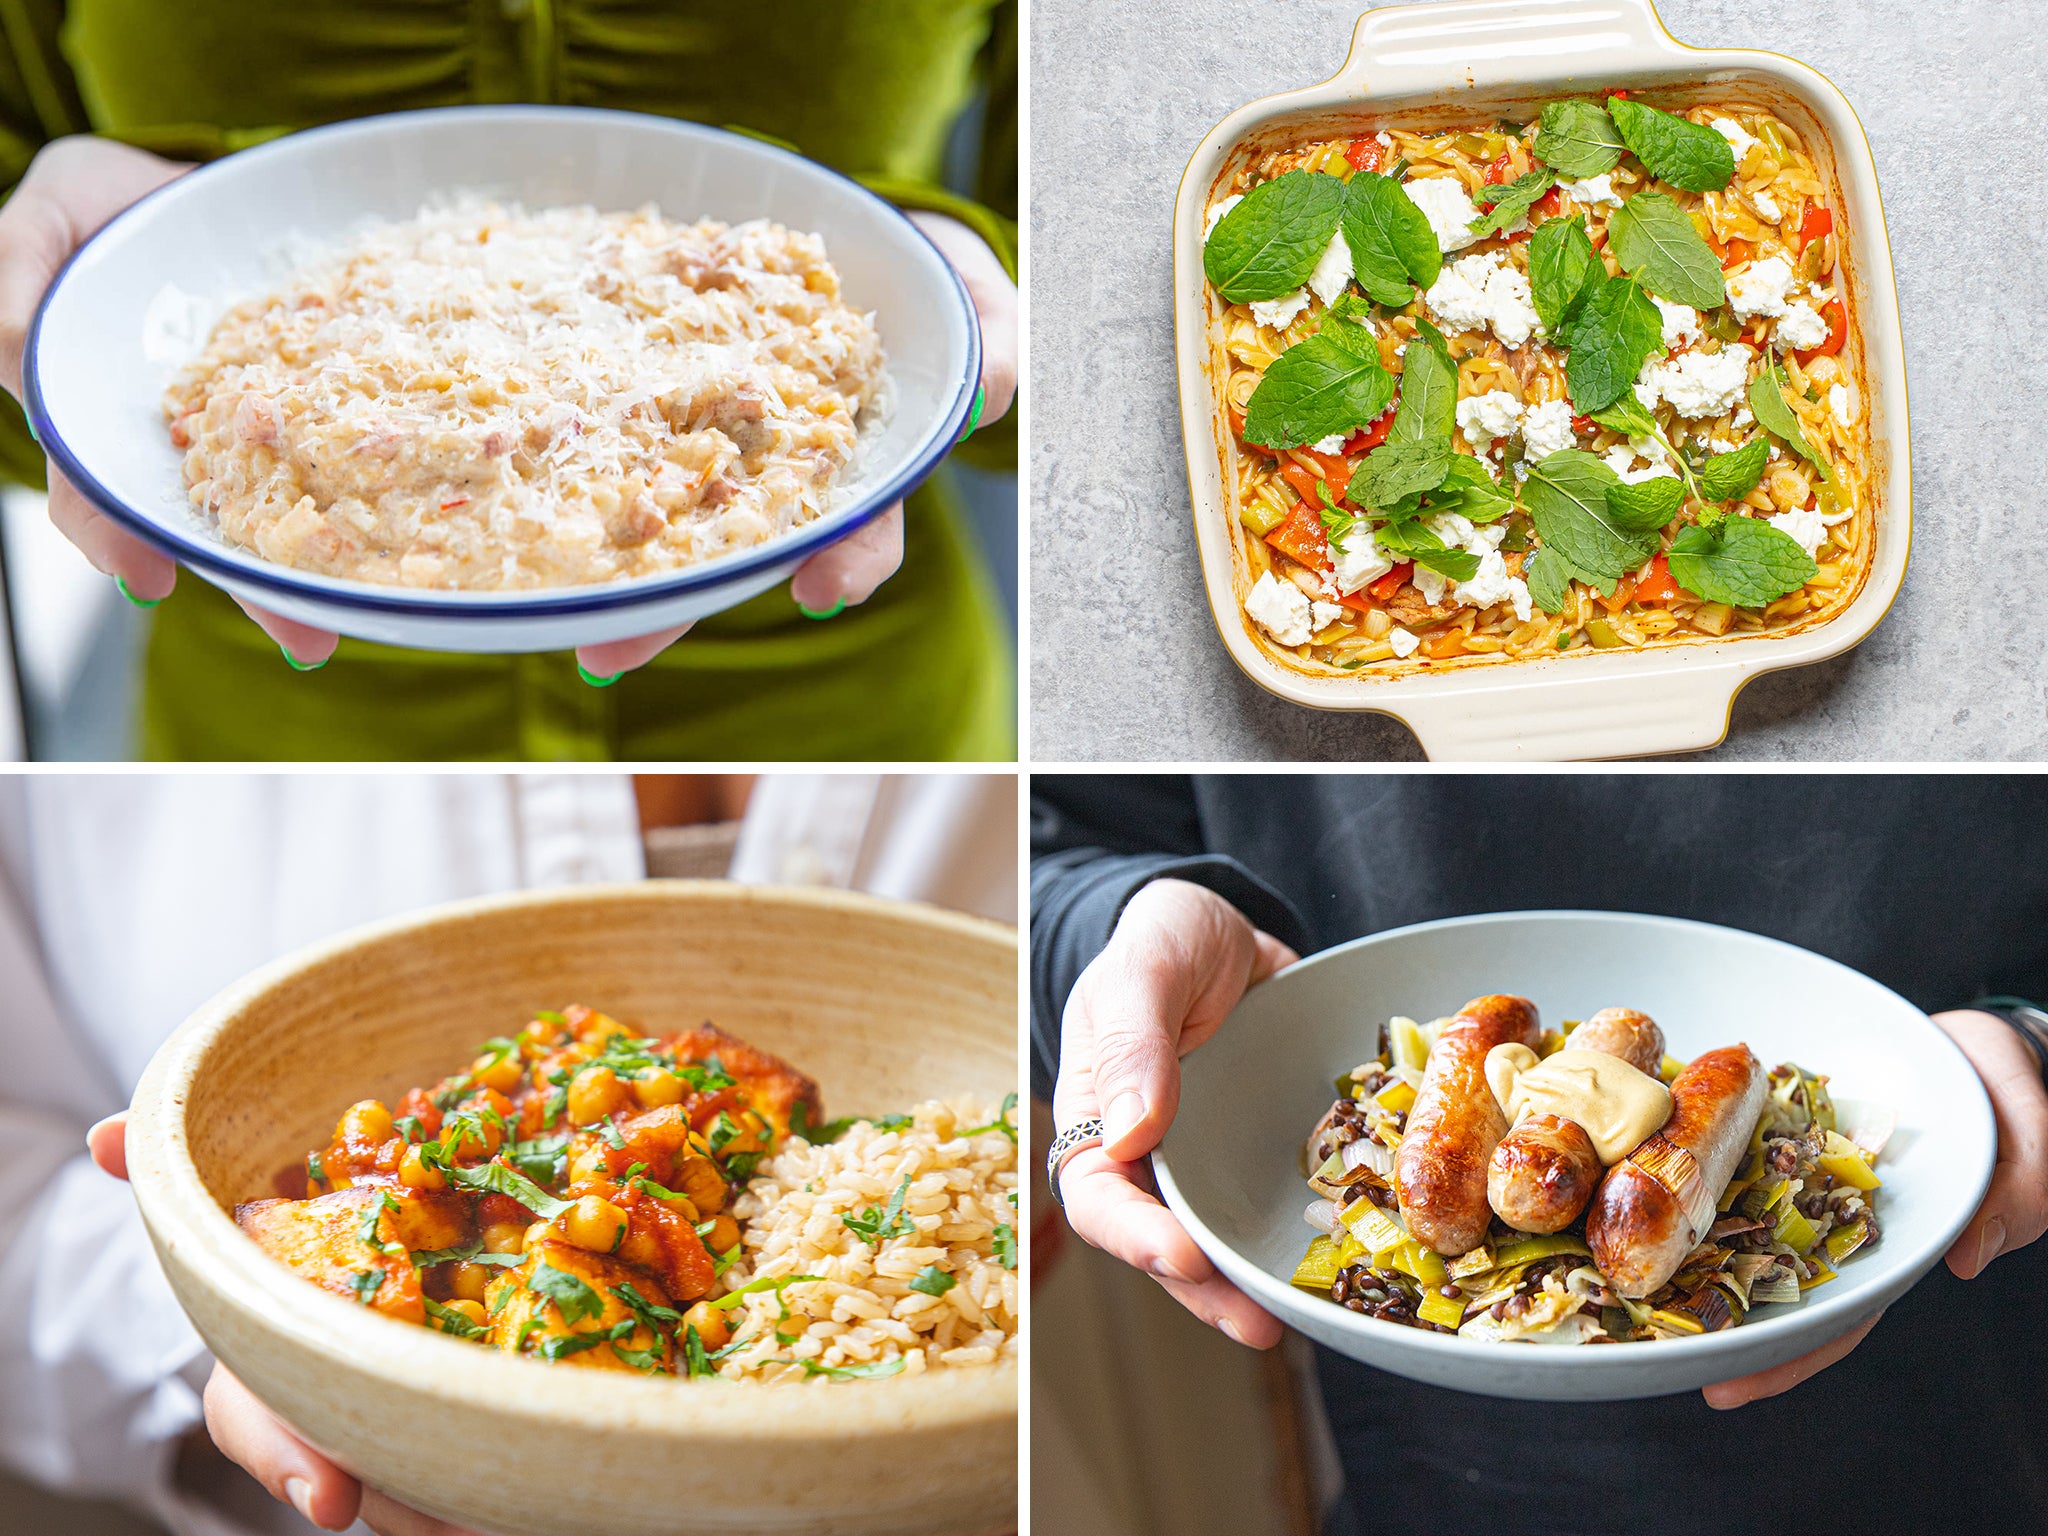 You can’t get a much simpler way to cook tasty, nourishing meals from a range of cuisines than one-pot recipes